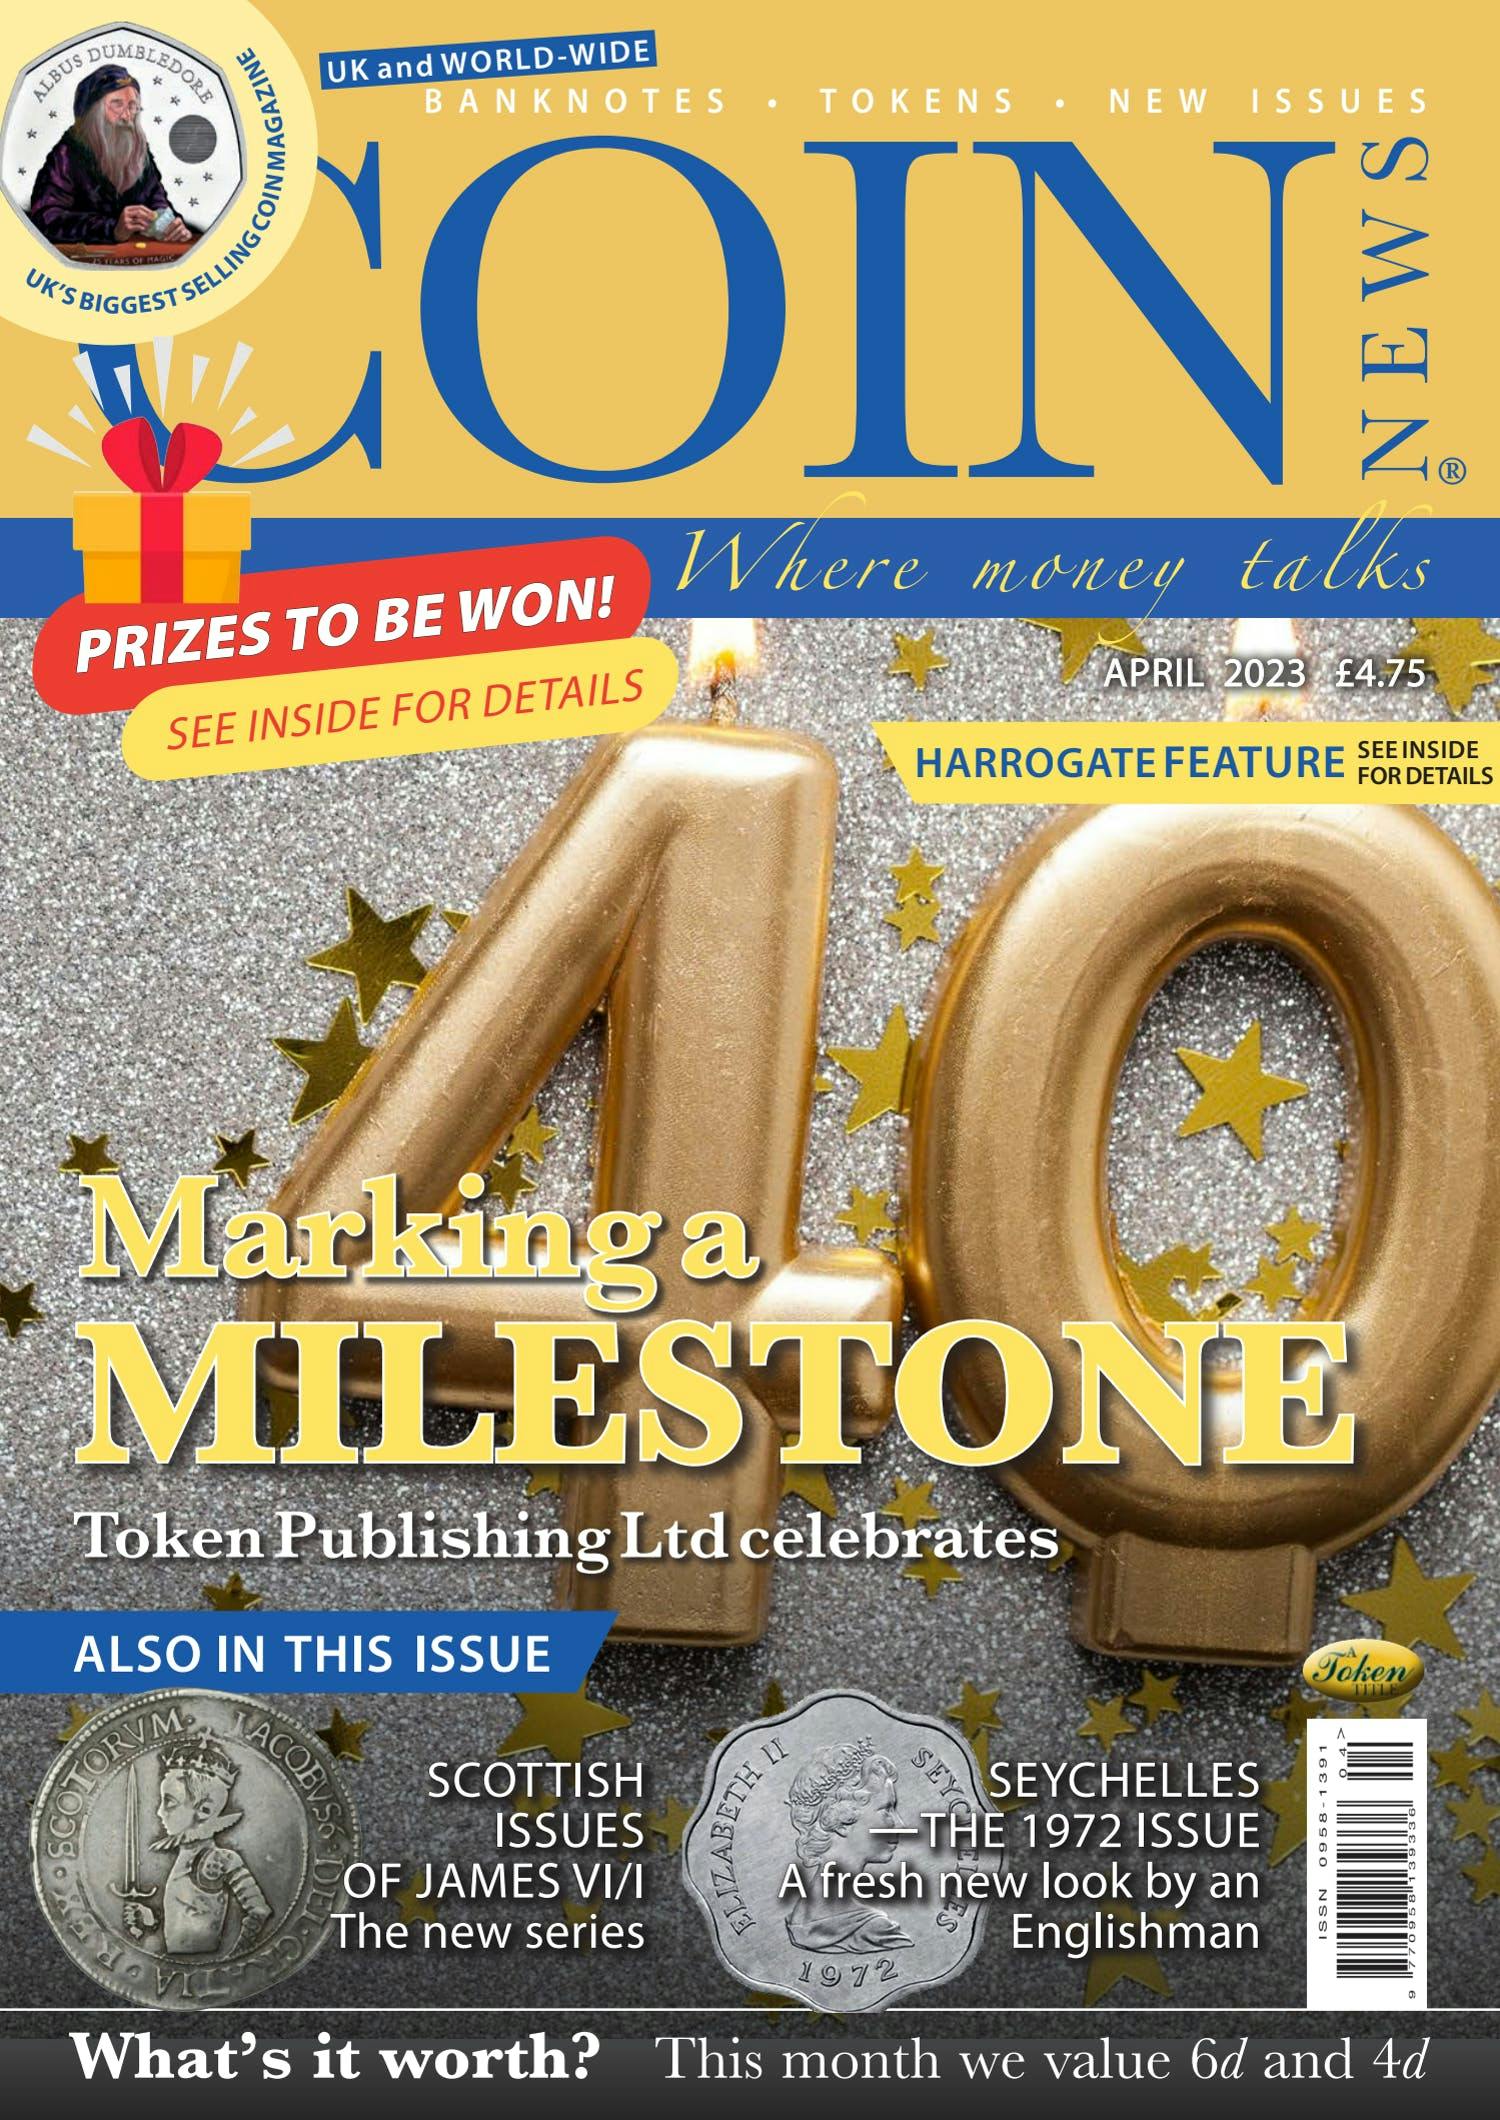 The front cover of Coin News, April 2023 - Volume 60, Number 4